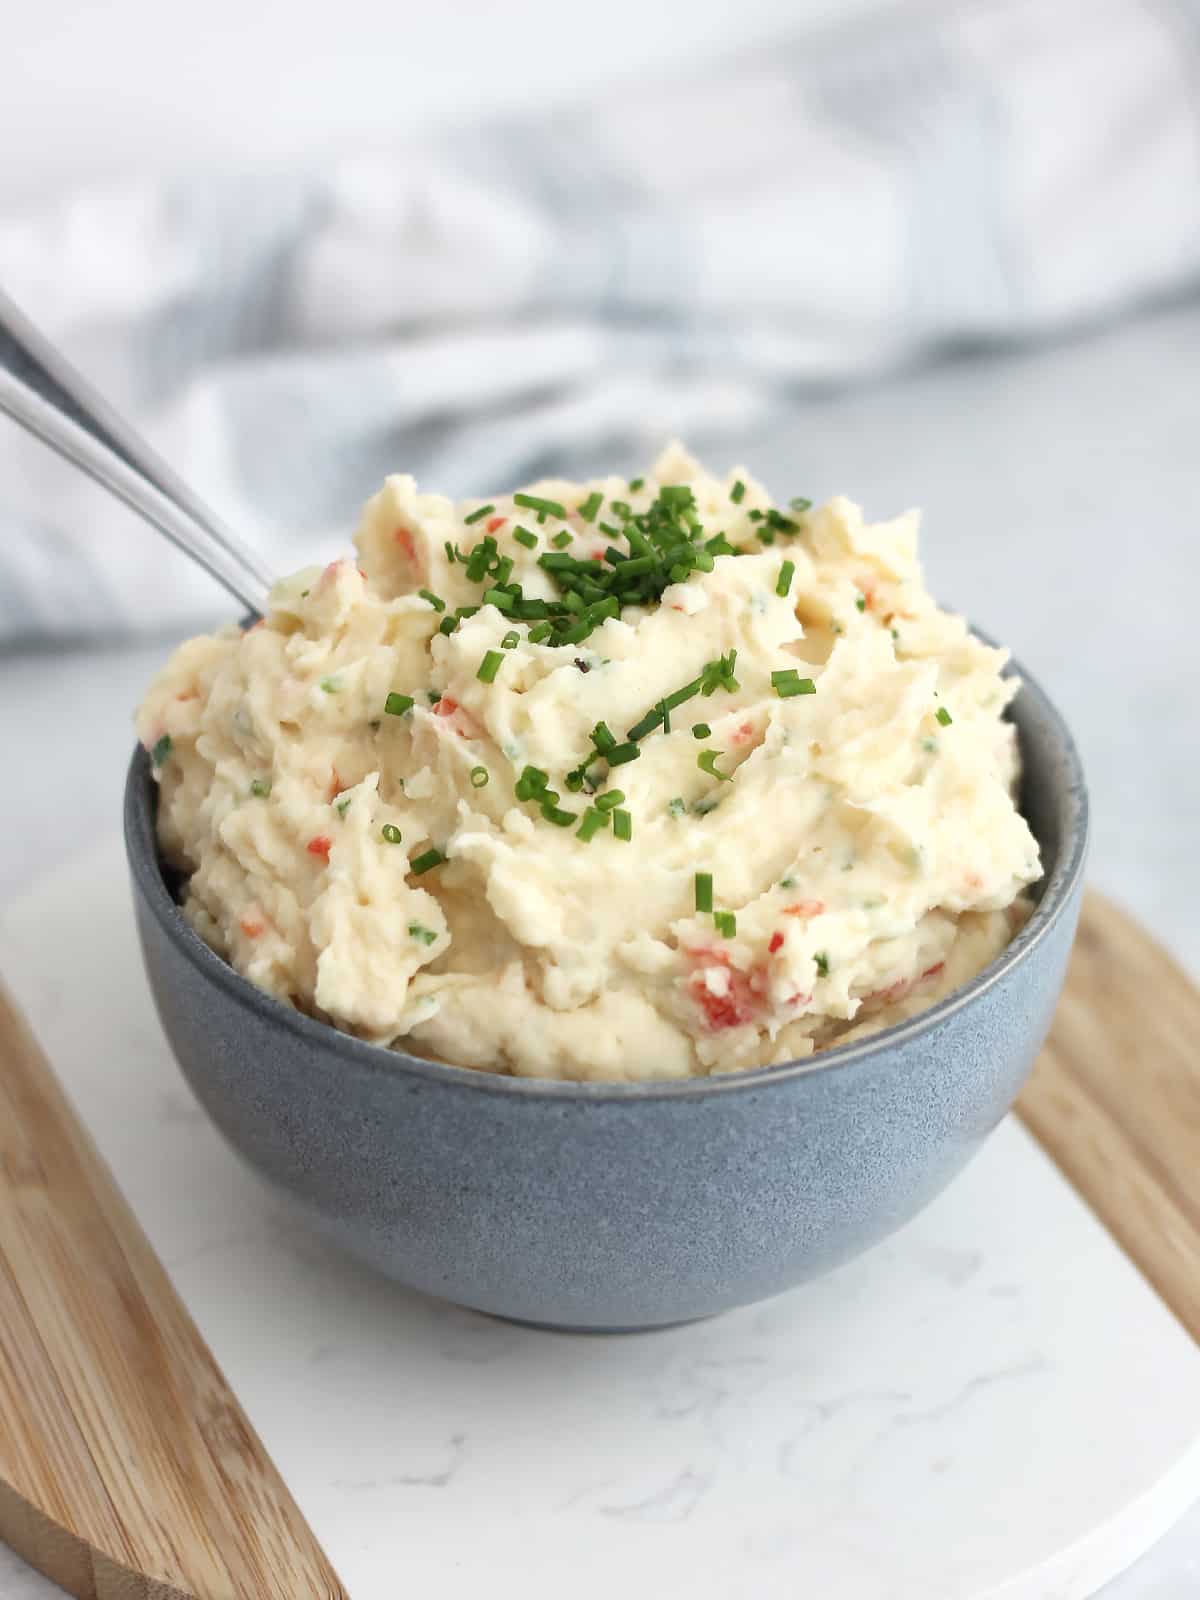 A bowl of cold mashed potato salad on a wooden chopping board.